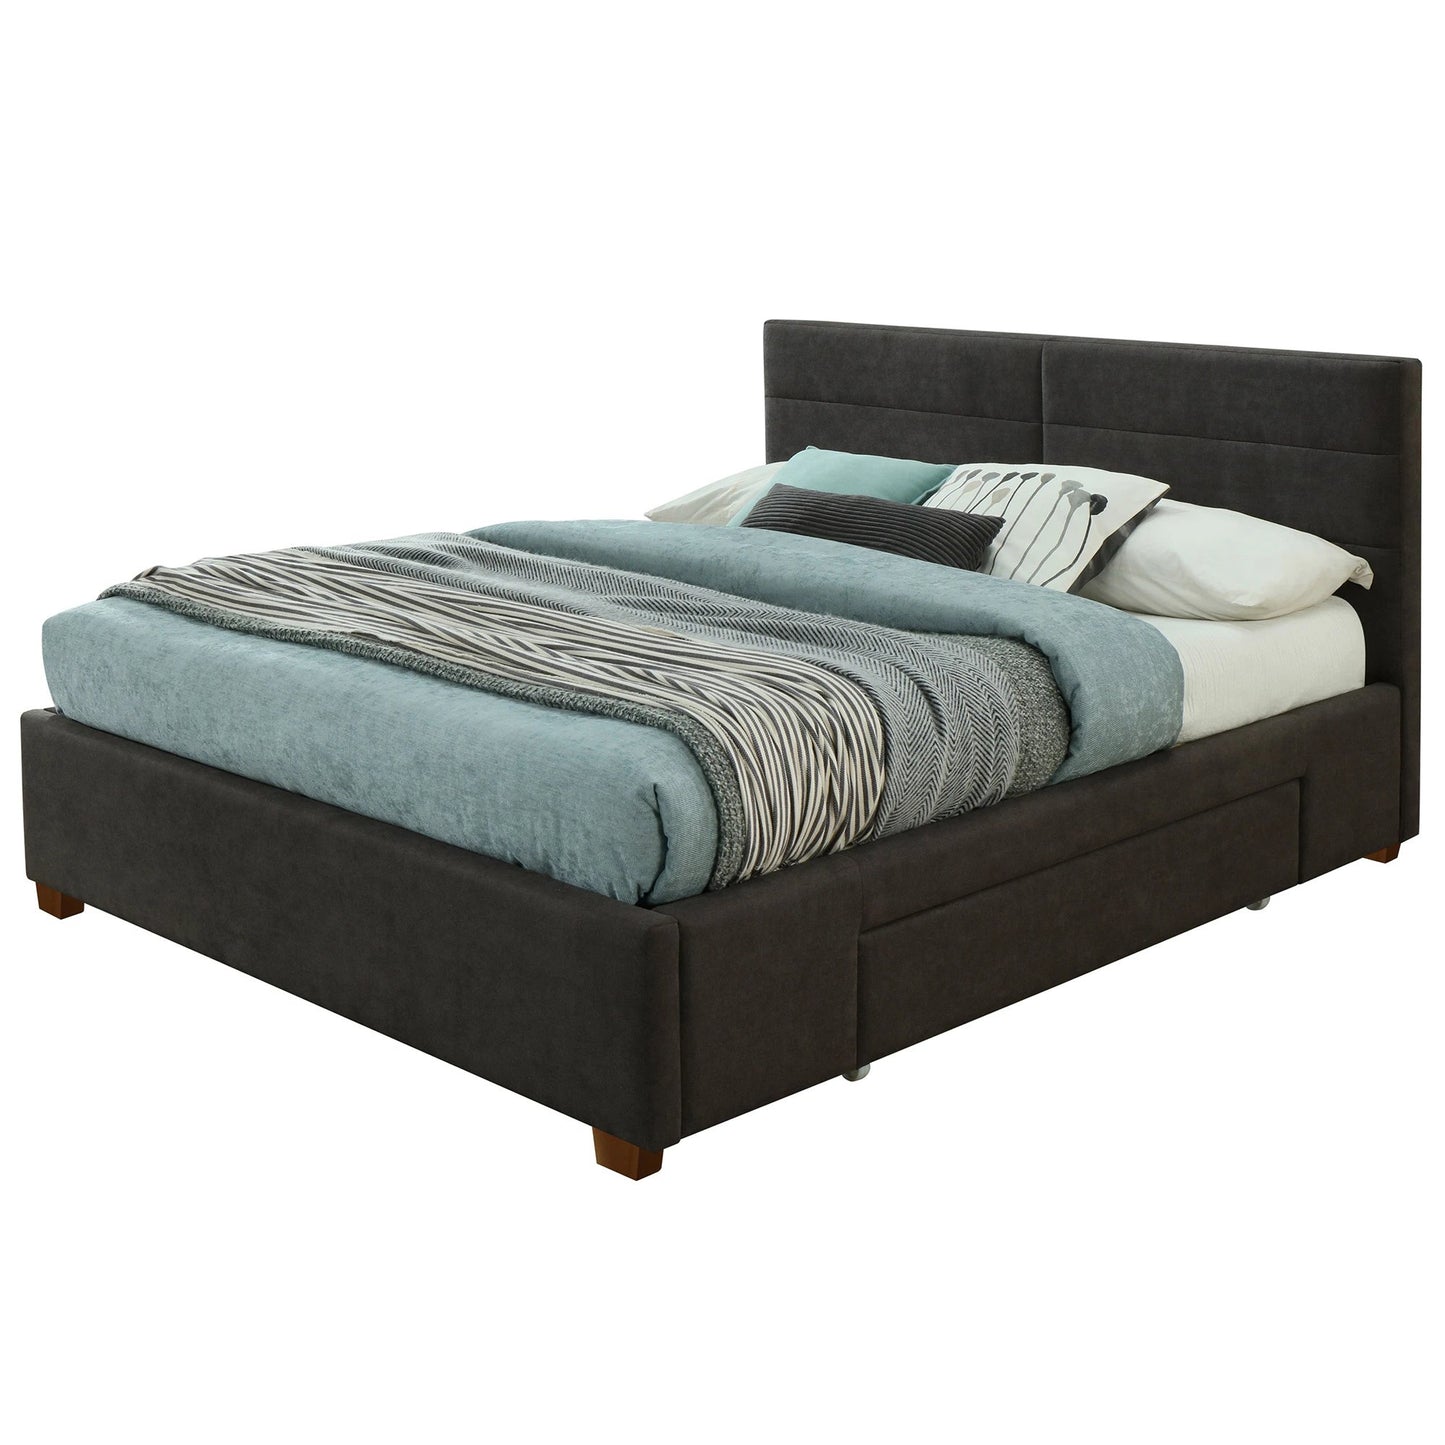 Emilio 60" Queen Platform Bed W/Drawers in Charcoal - Dreamart Gallery